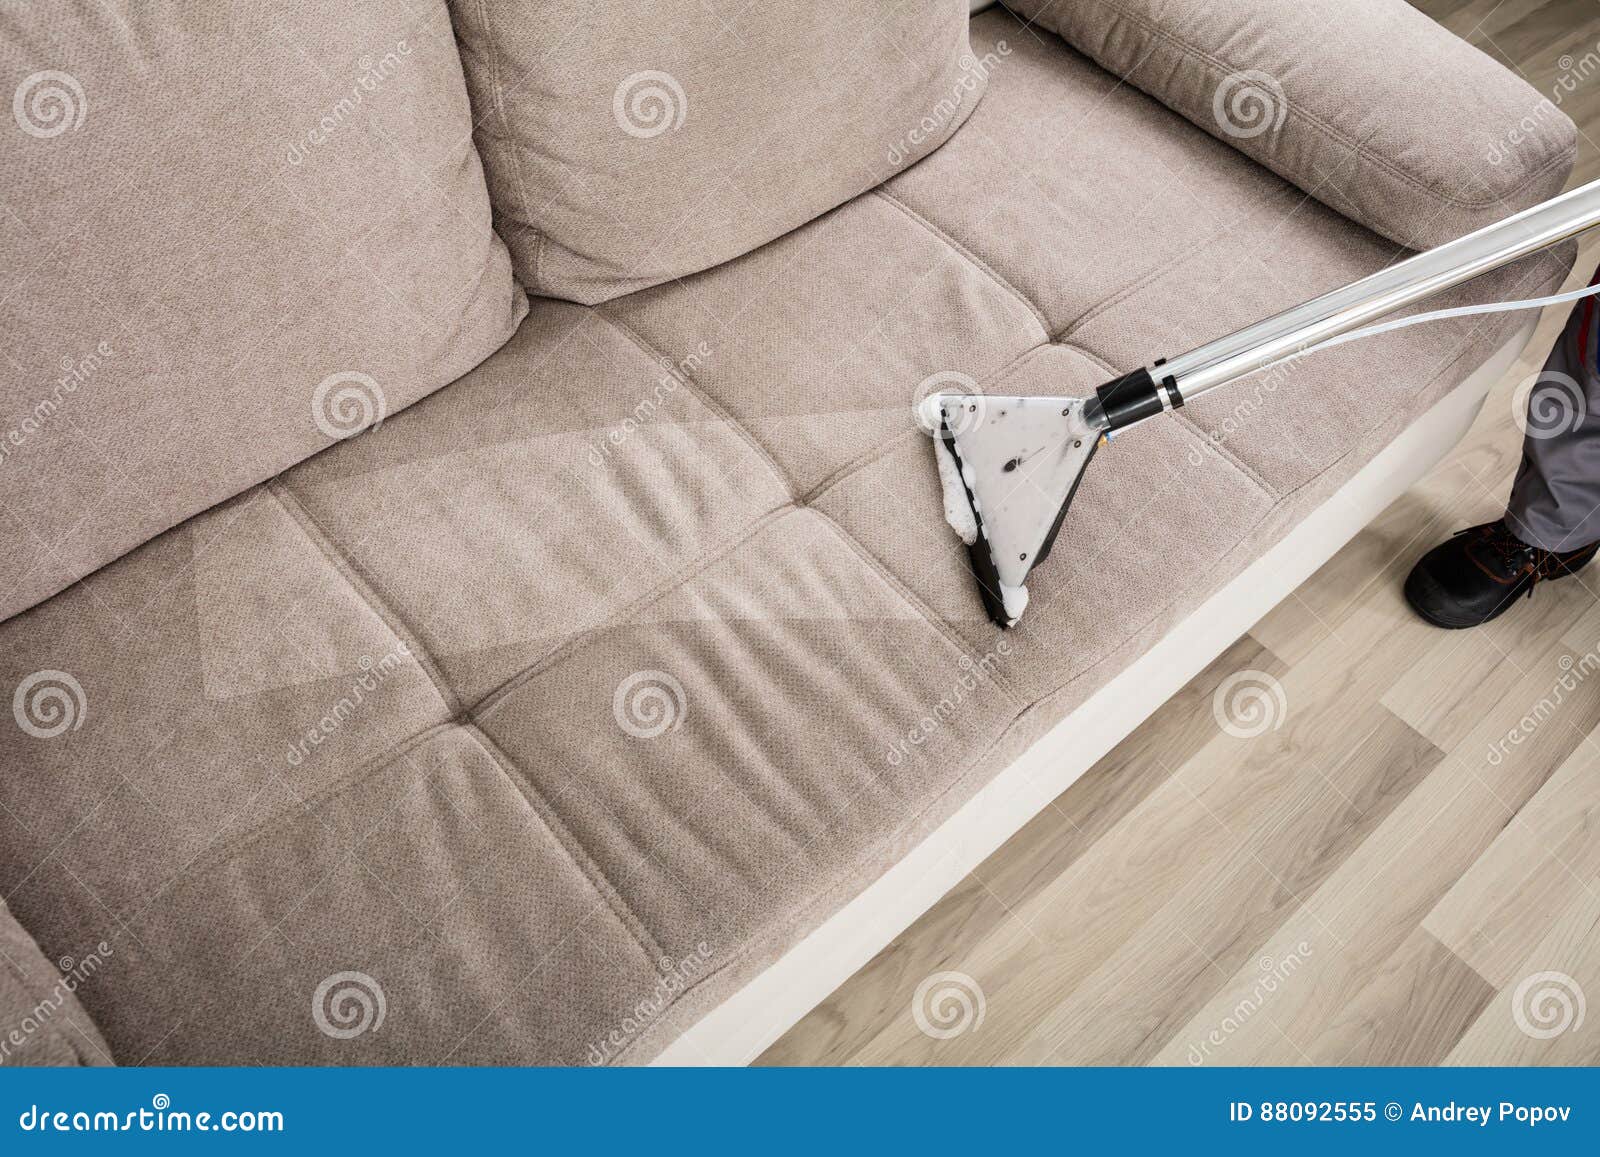 person cleaning sofa with vacuum cleaner